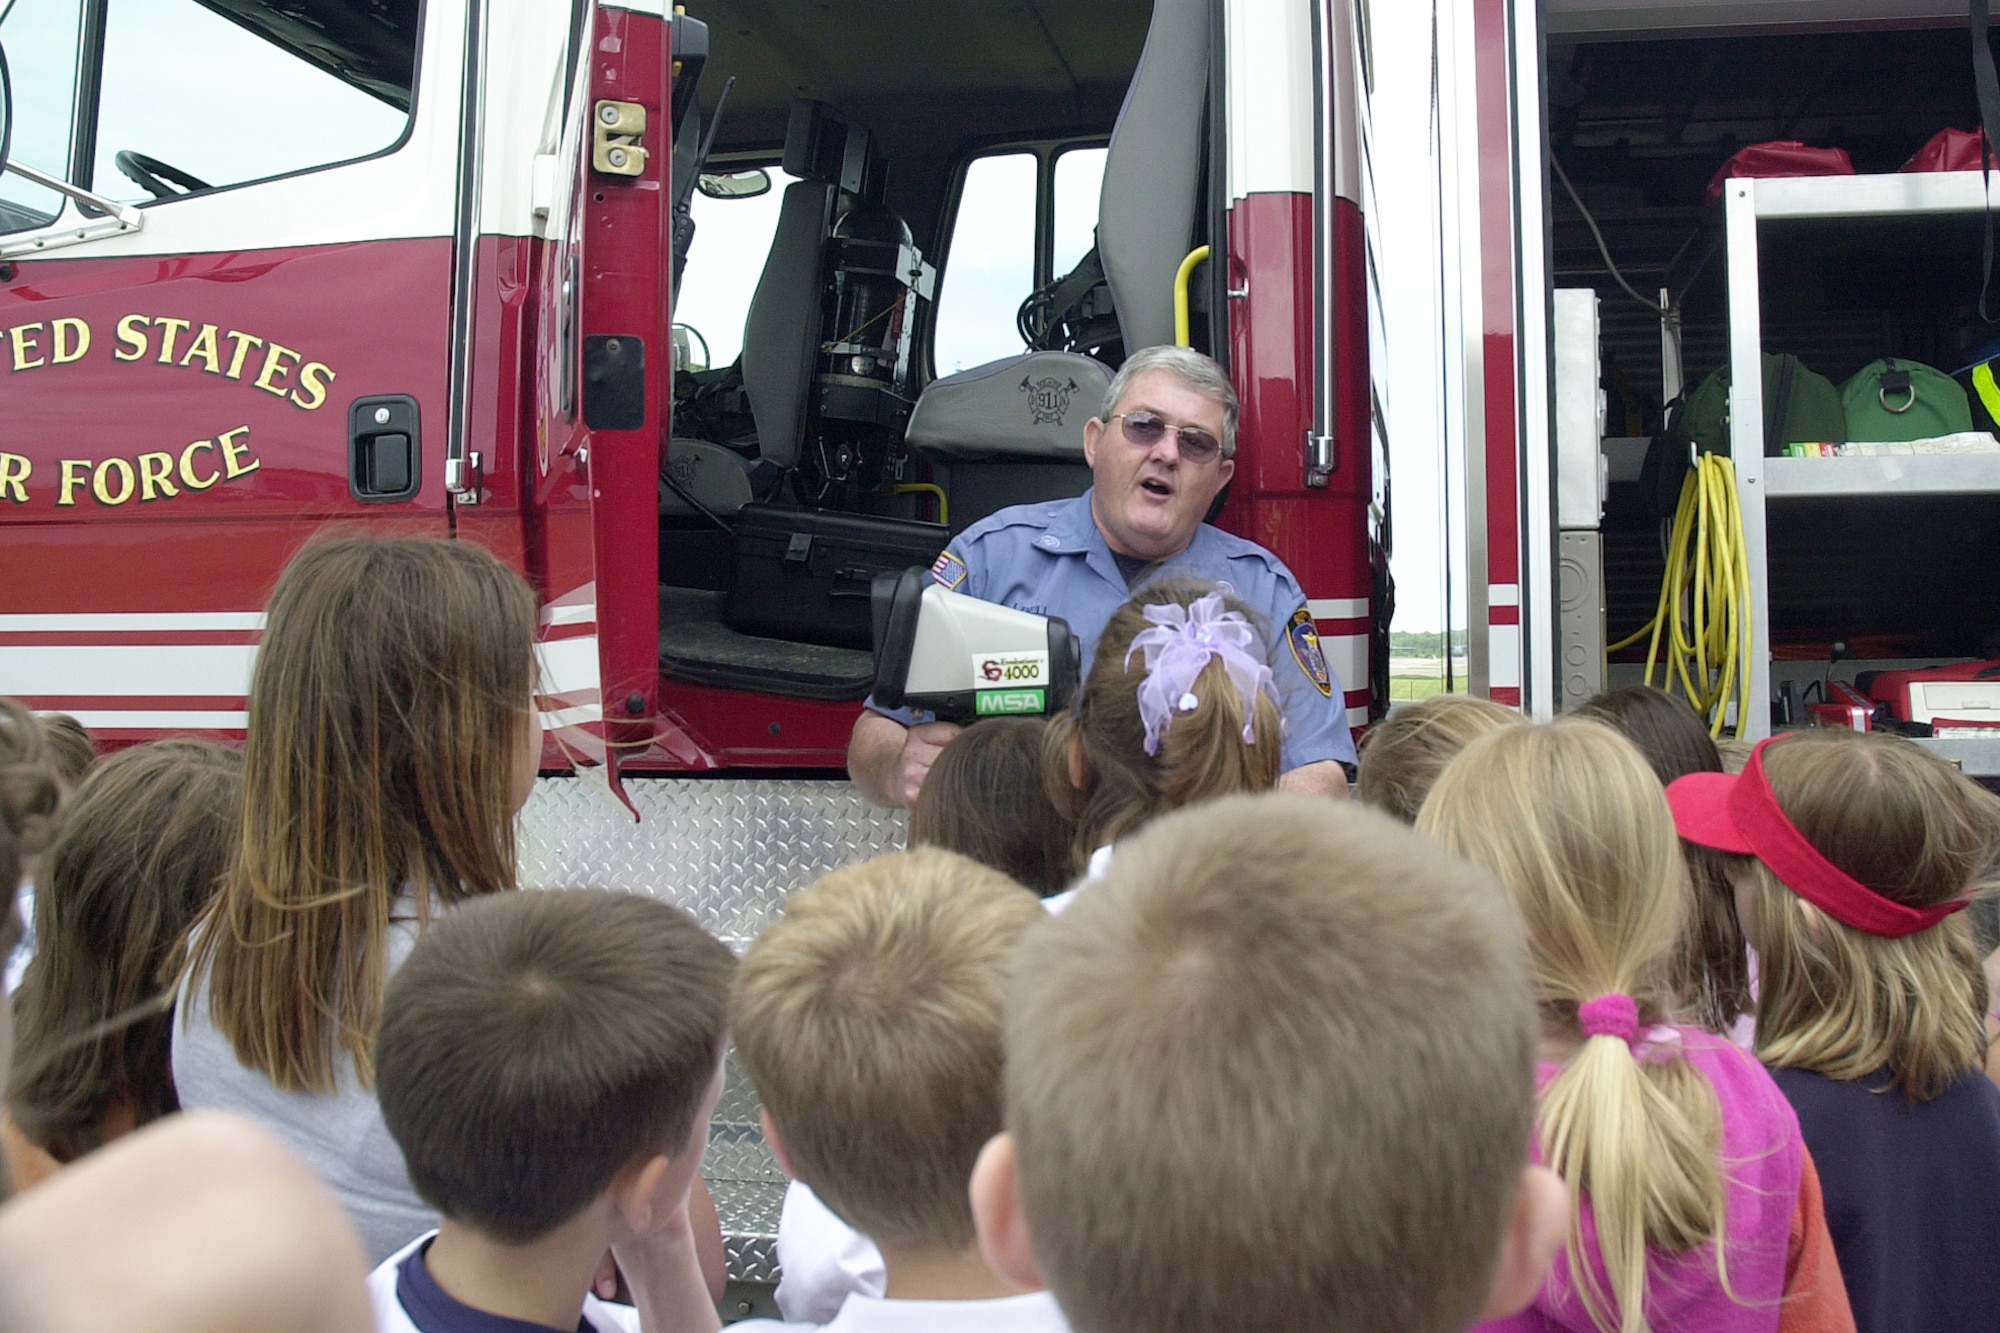 YOUNGSTOWN AIR RESERVE STATION, Ohio - Mr. Jeffery L. Bell, a civilian fire fighter employed with the 910th Airlift Wing here, discusses a thermal imaging camera with third-graders from Lowellville K-12 School in Lowellville, Ohio.  The children are just some of the more than 1,000 people who can be expected to tour Youngstown Air Reserve Station during the May to September tour season. (U.S. Air Force photo/Tech. Sgt. Ken Sloat)                                